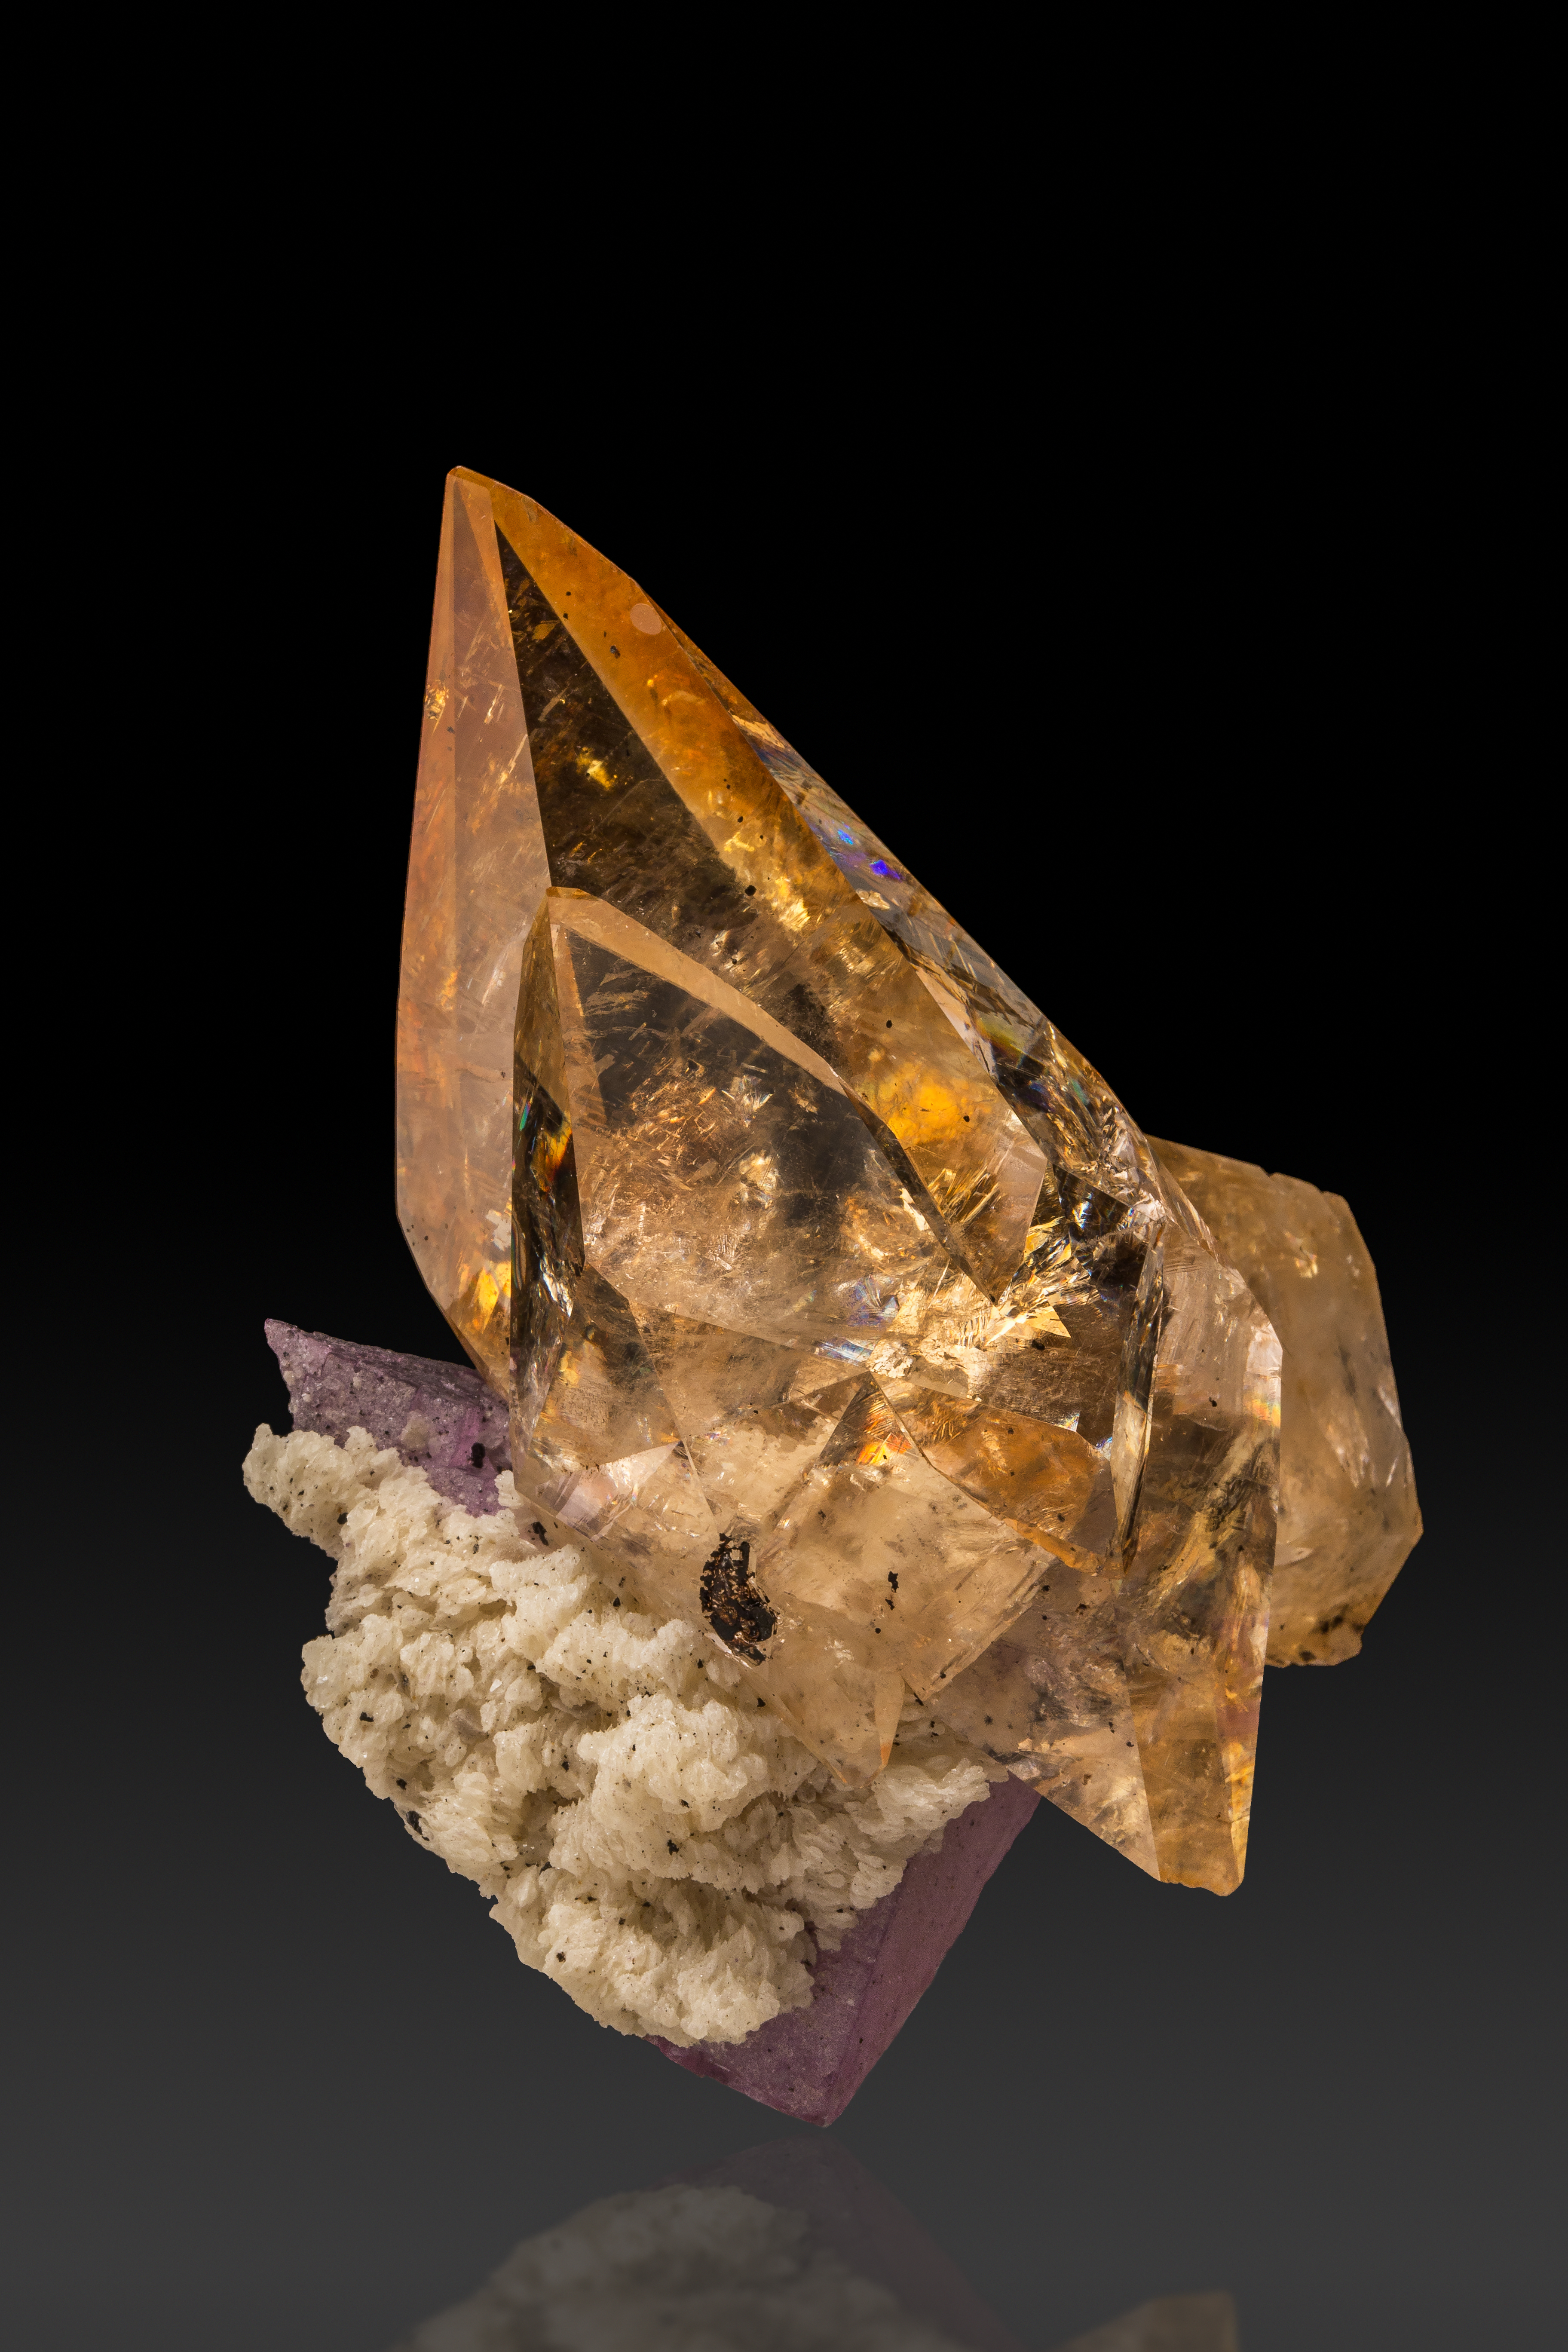 A large, clear orange calcite points to the upper left of the image. It appears to be bursting forth from a gray and purple base, barely visible on the bottom left. On a black background. 